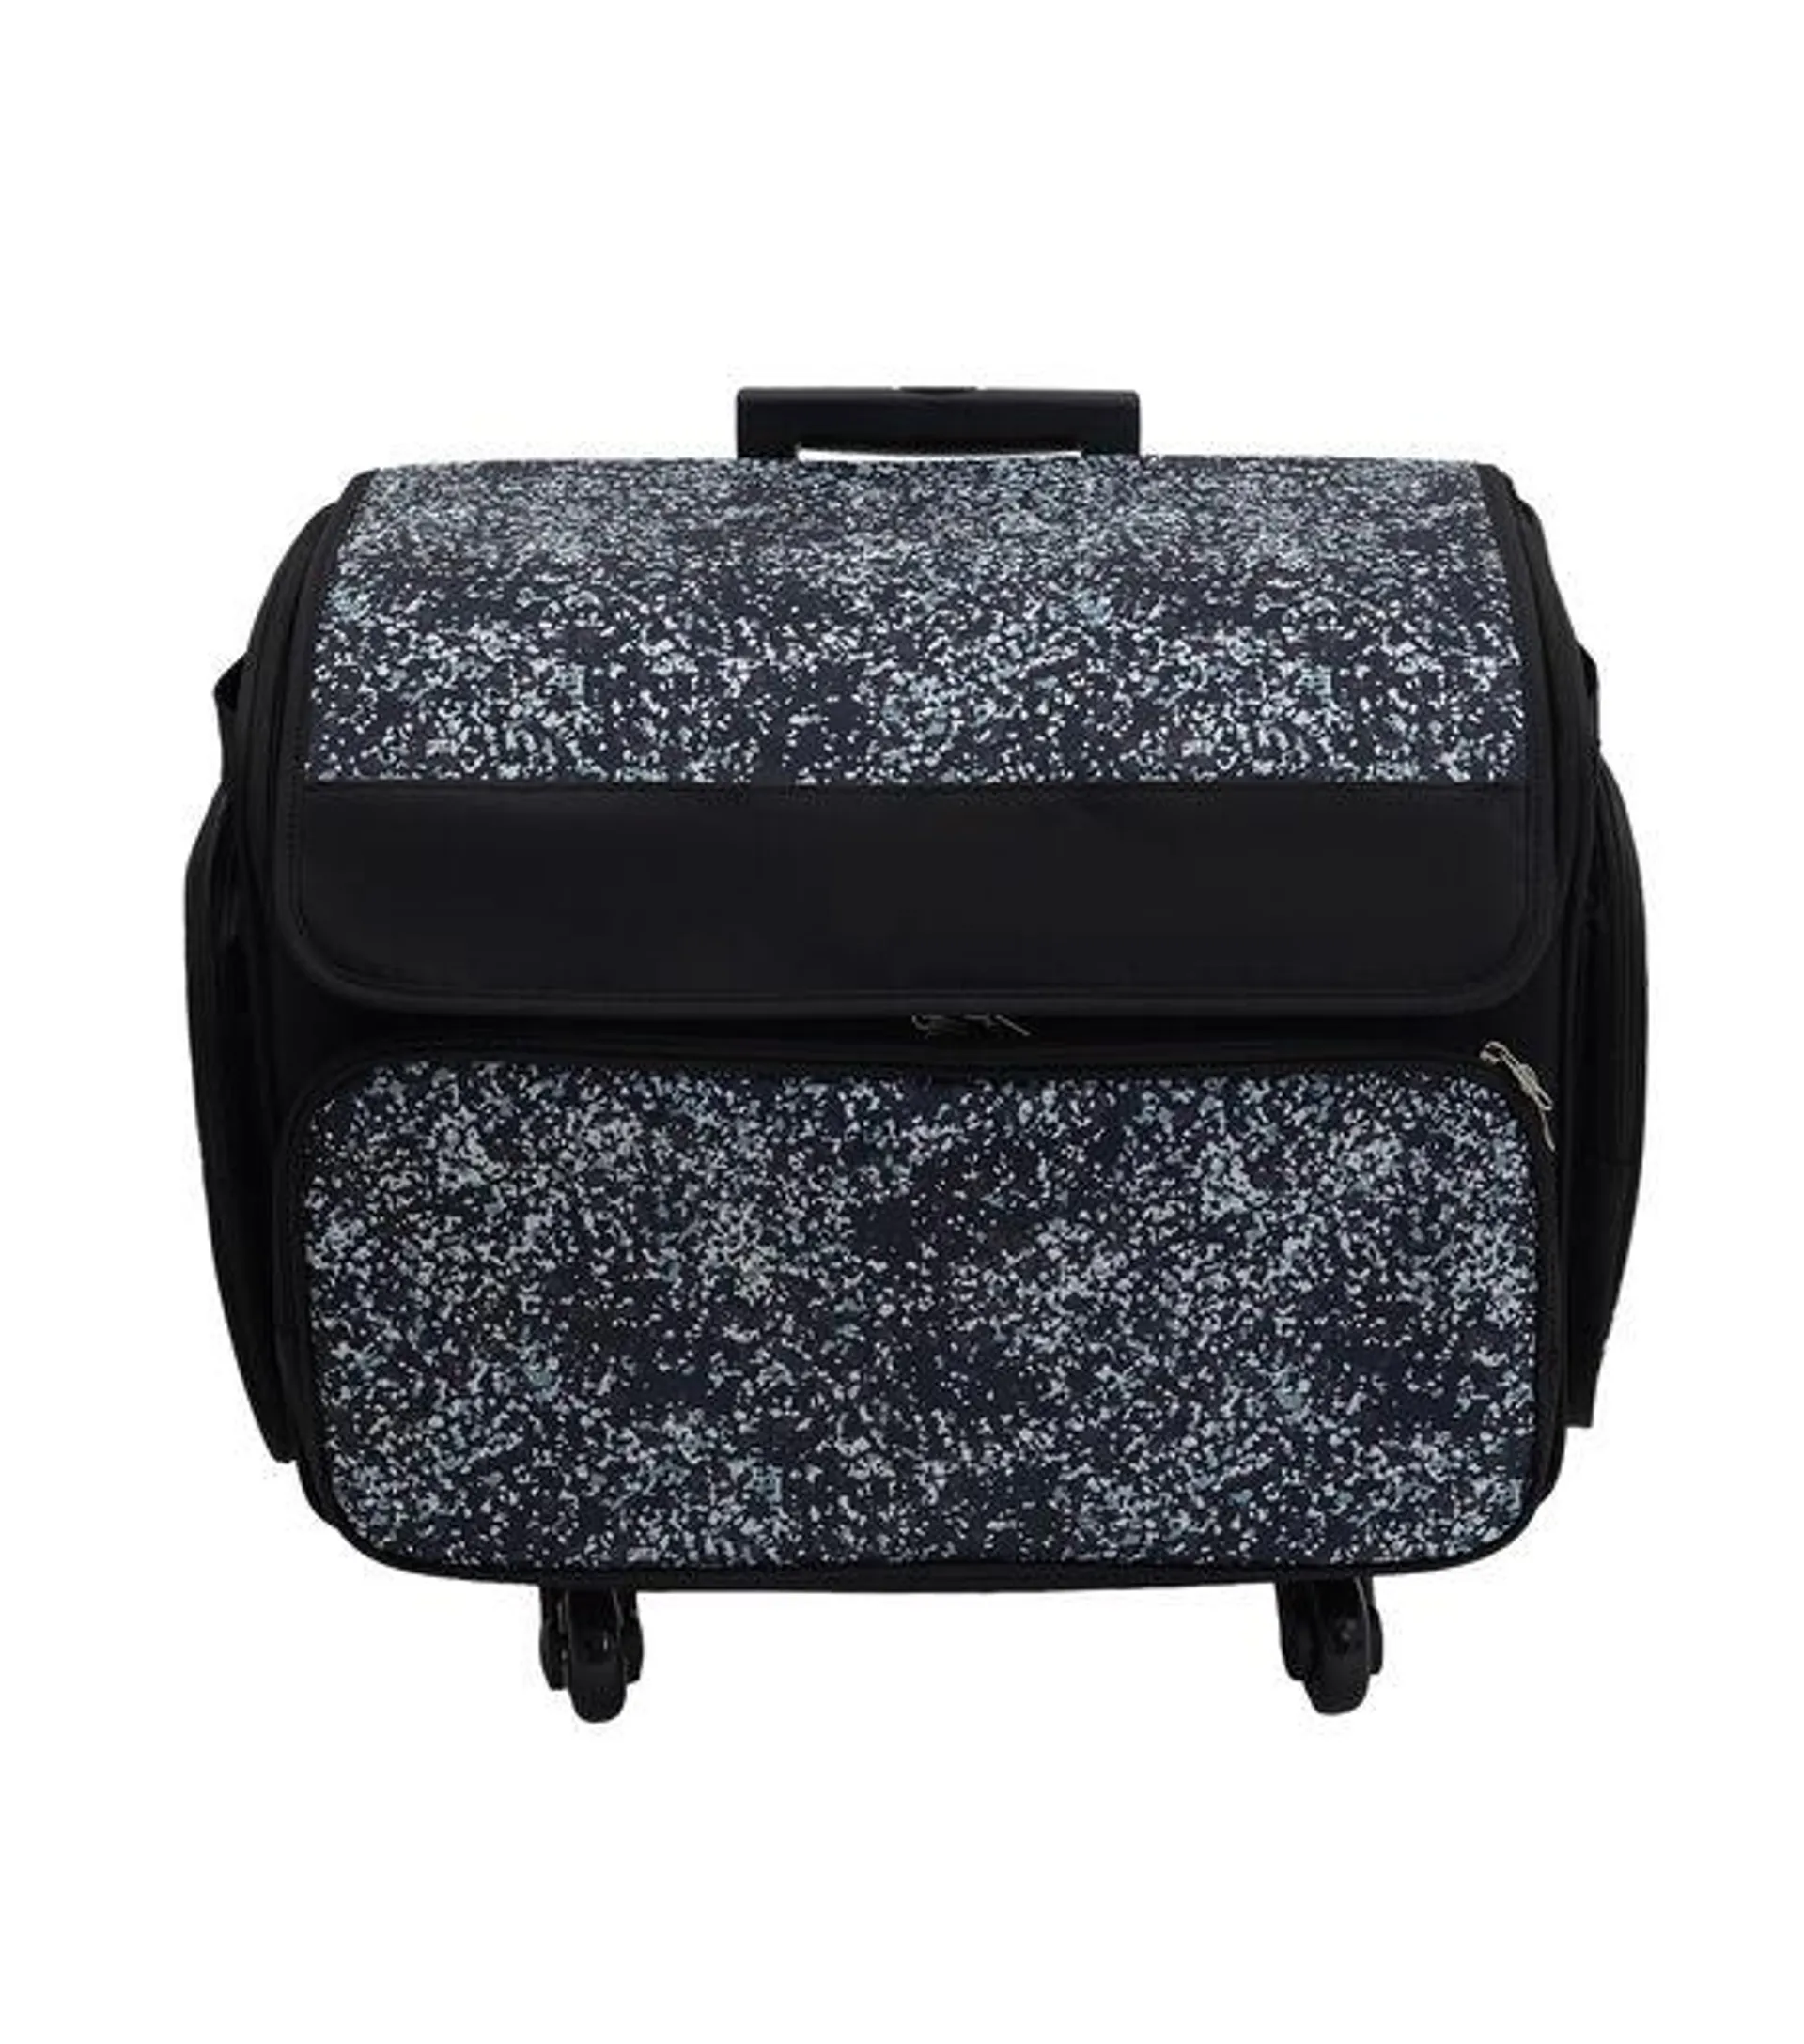 13" x 18" Black Dots Rolling Sewing Machine Storage Tote by Top Notch